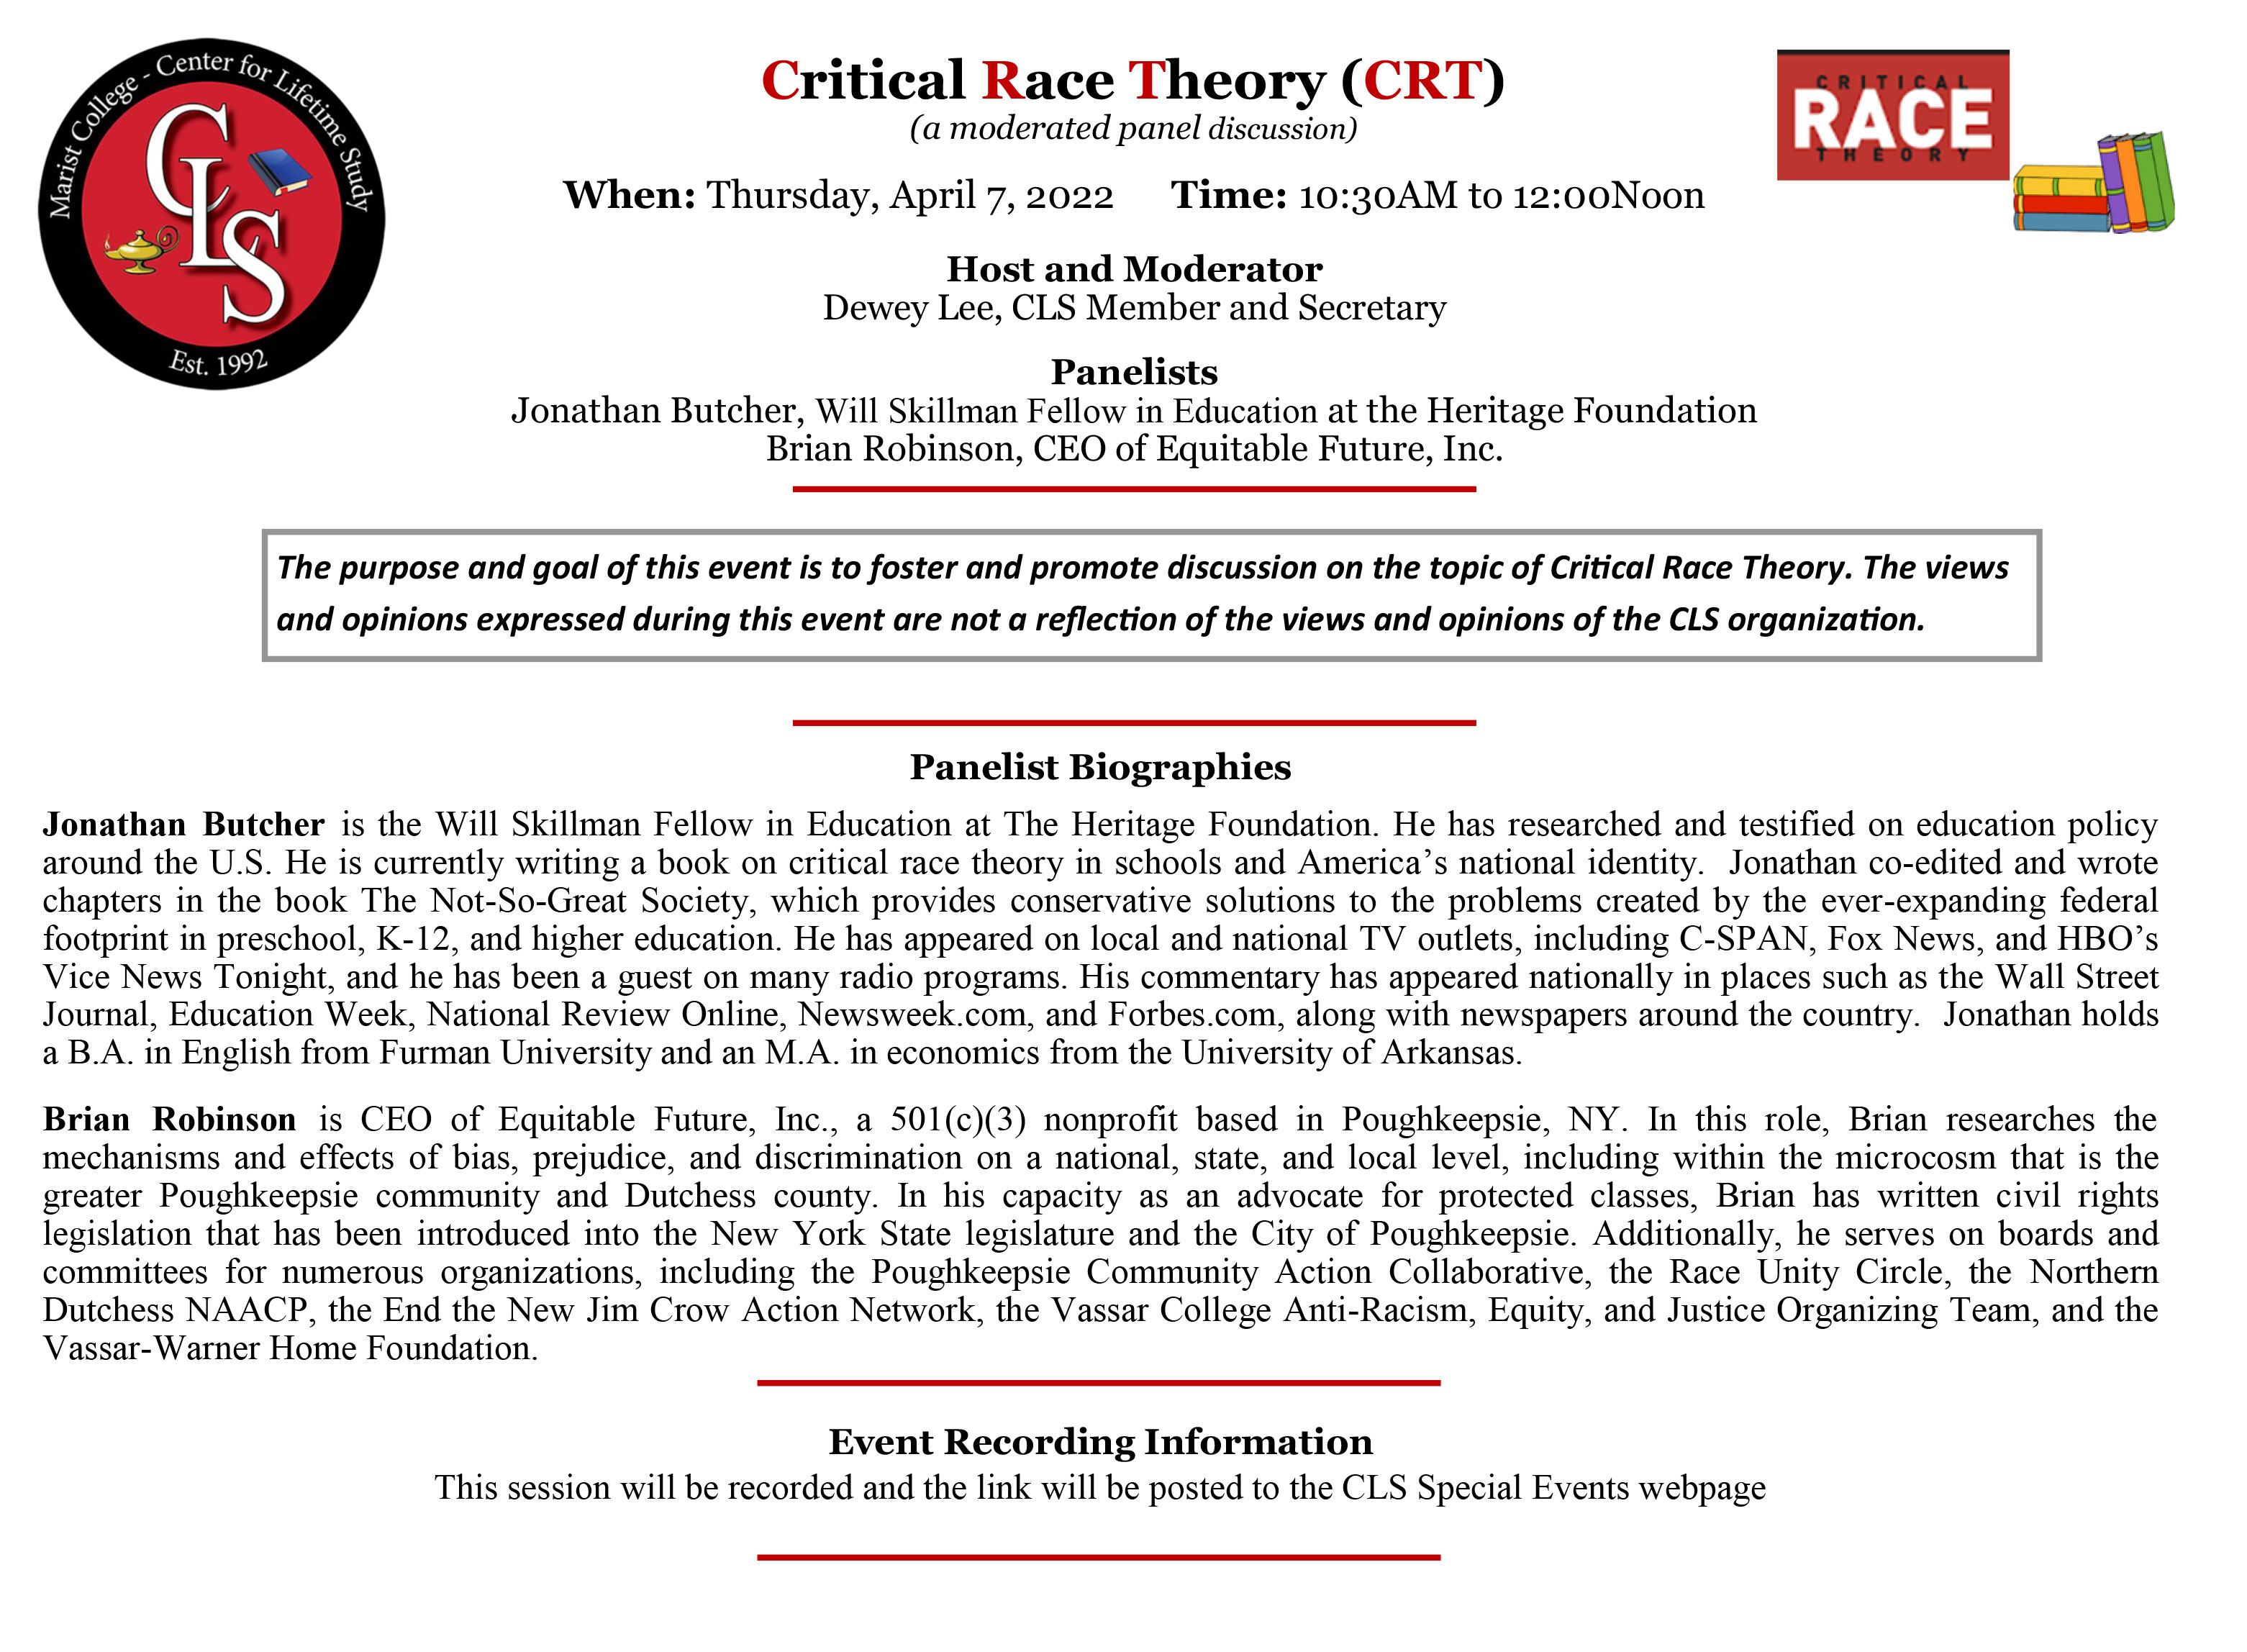 Image of Critical Race Theory event flyer